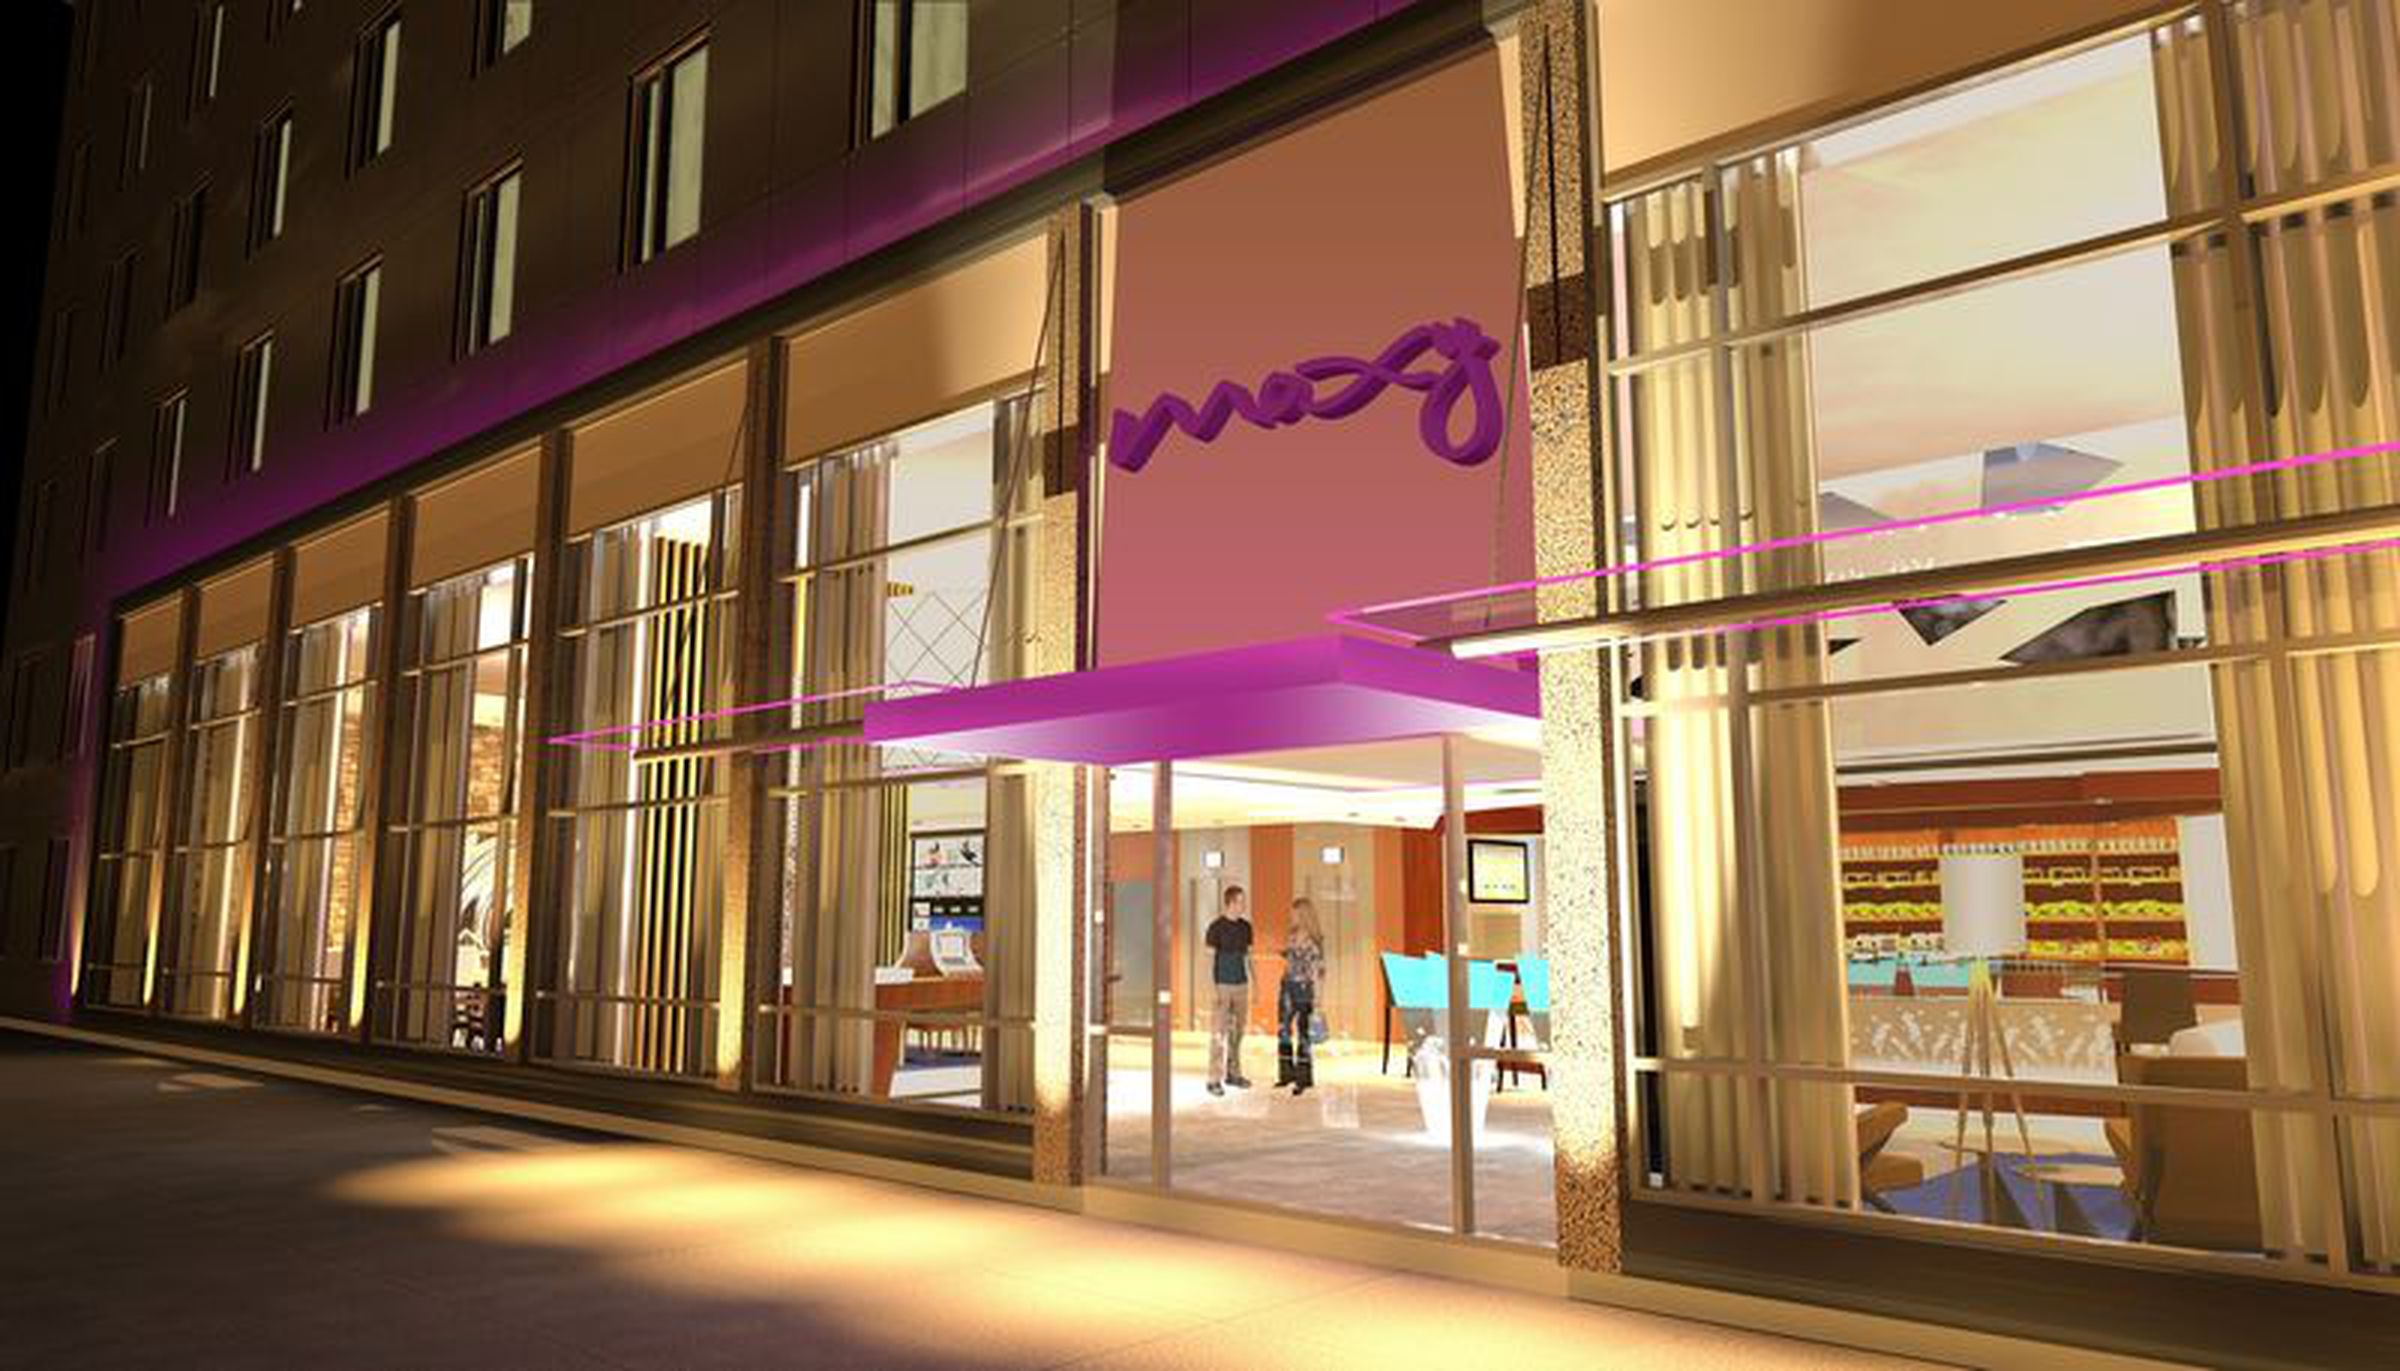 Moxy Hotel images